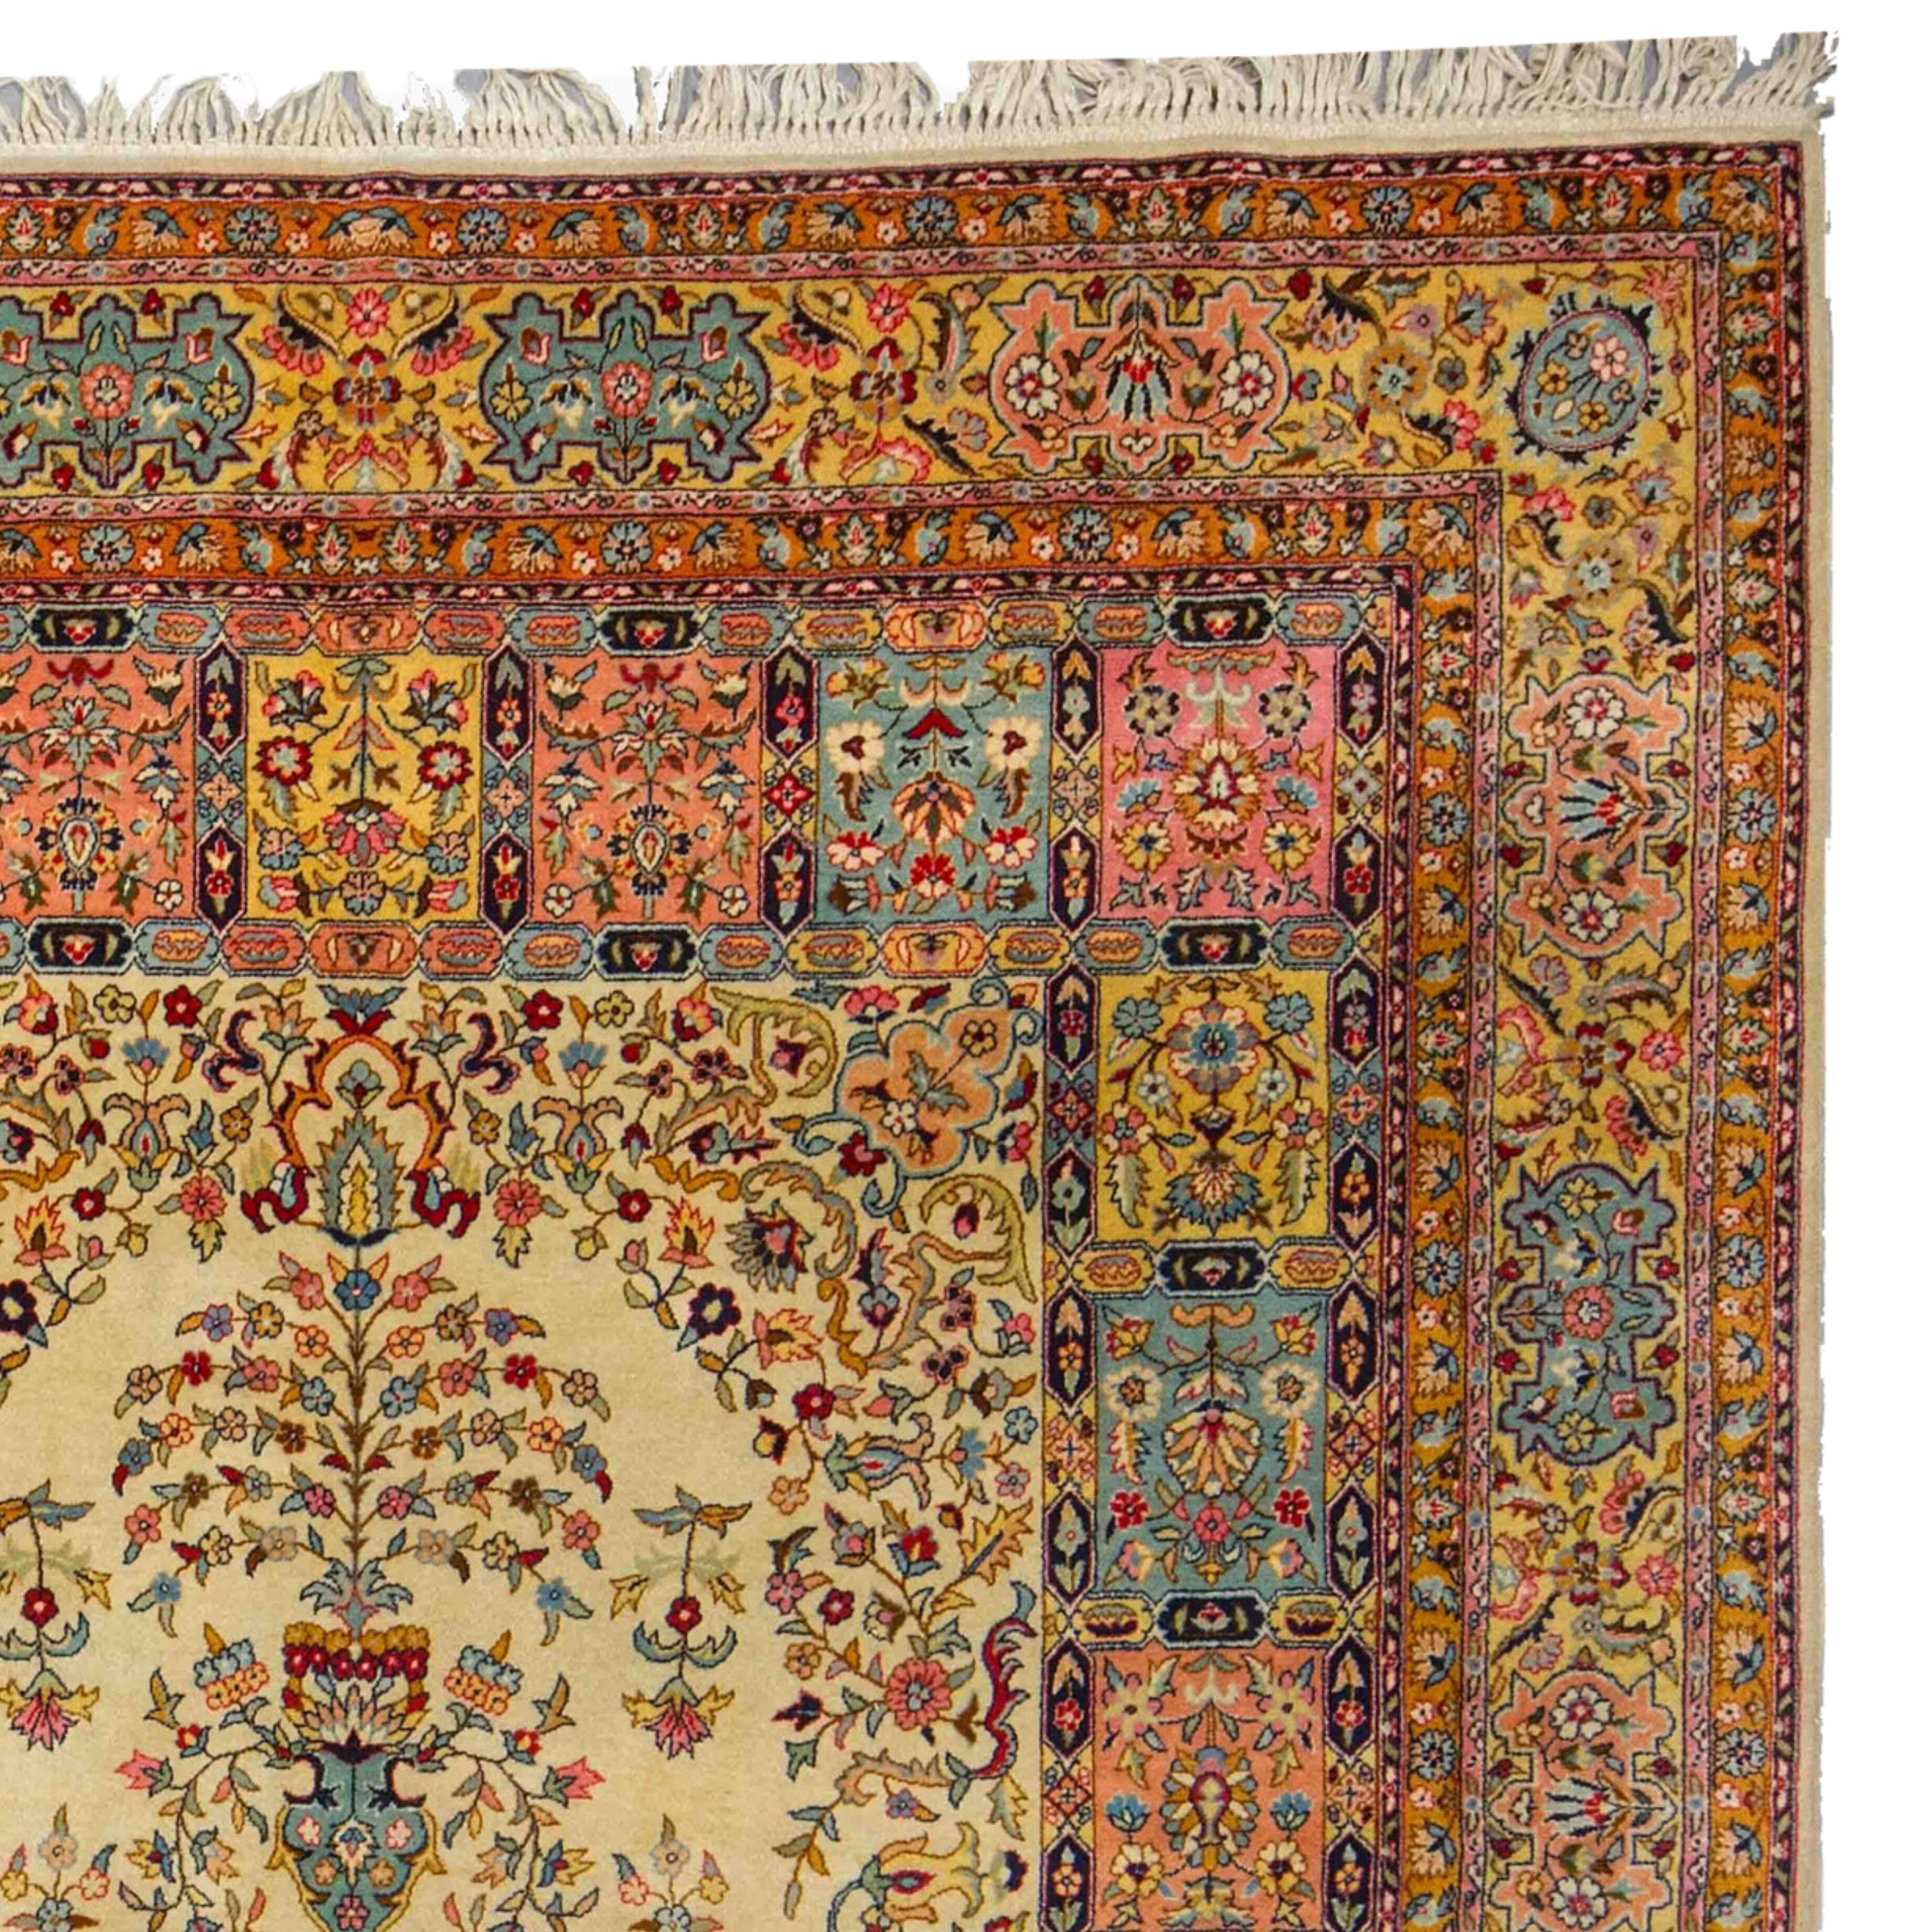 Antique Tabriz Rug - Late of 19th Century Tabriz Rug In Good Condition For Sale In Sultanahmet, 34